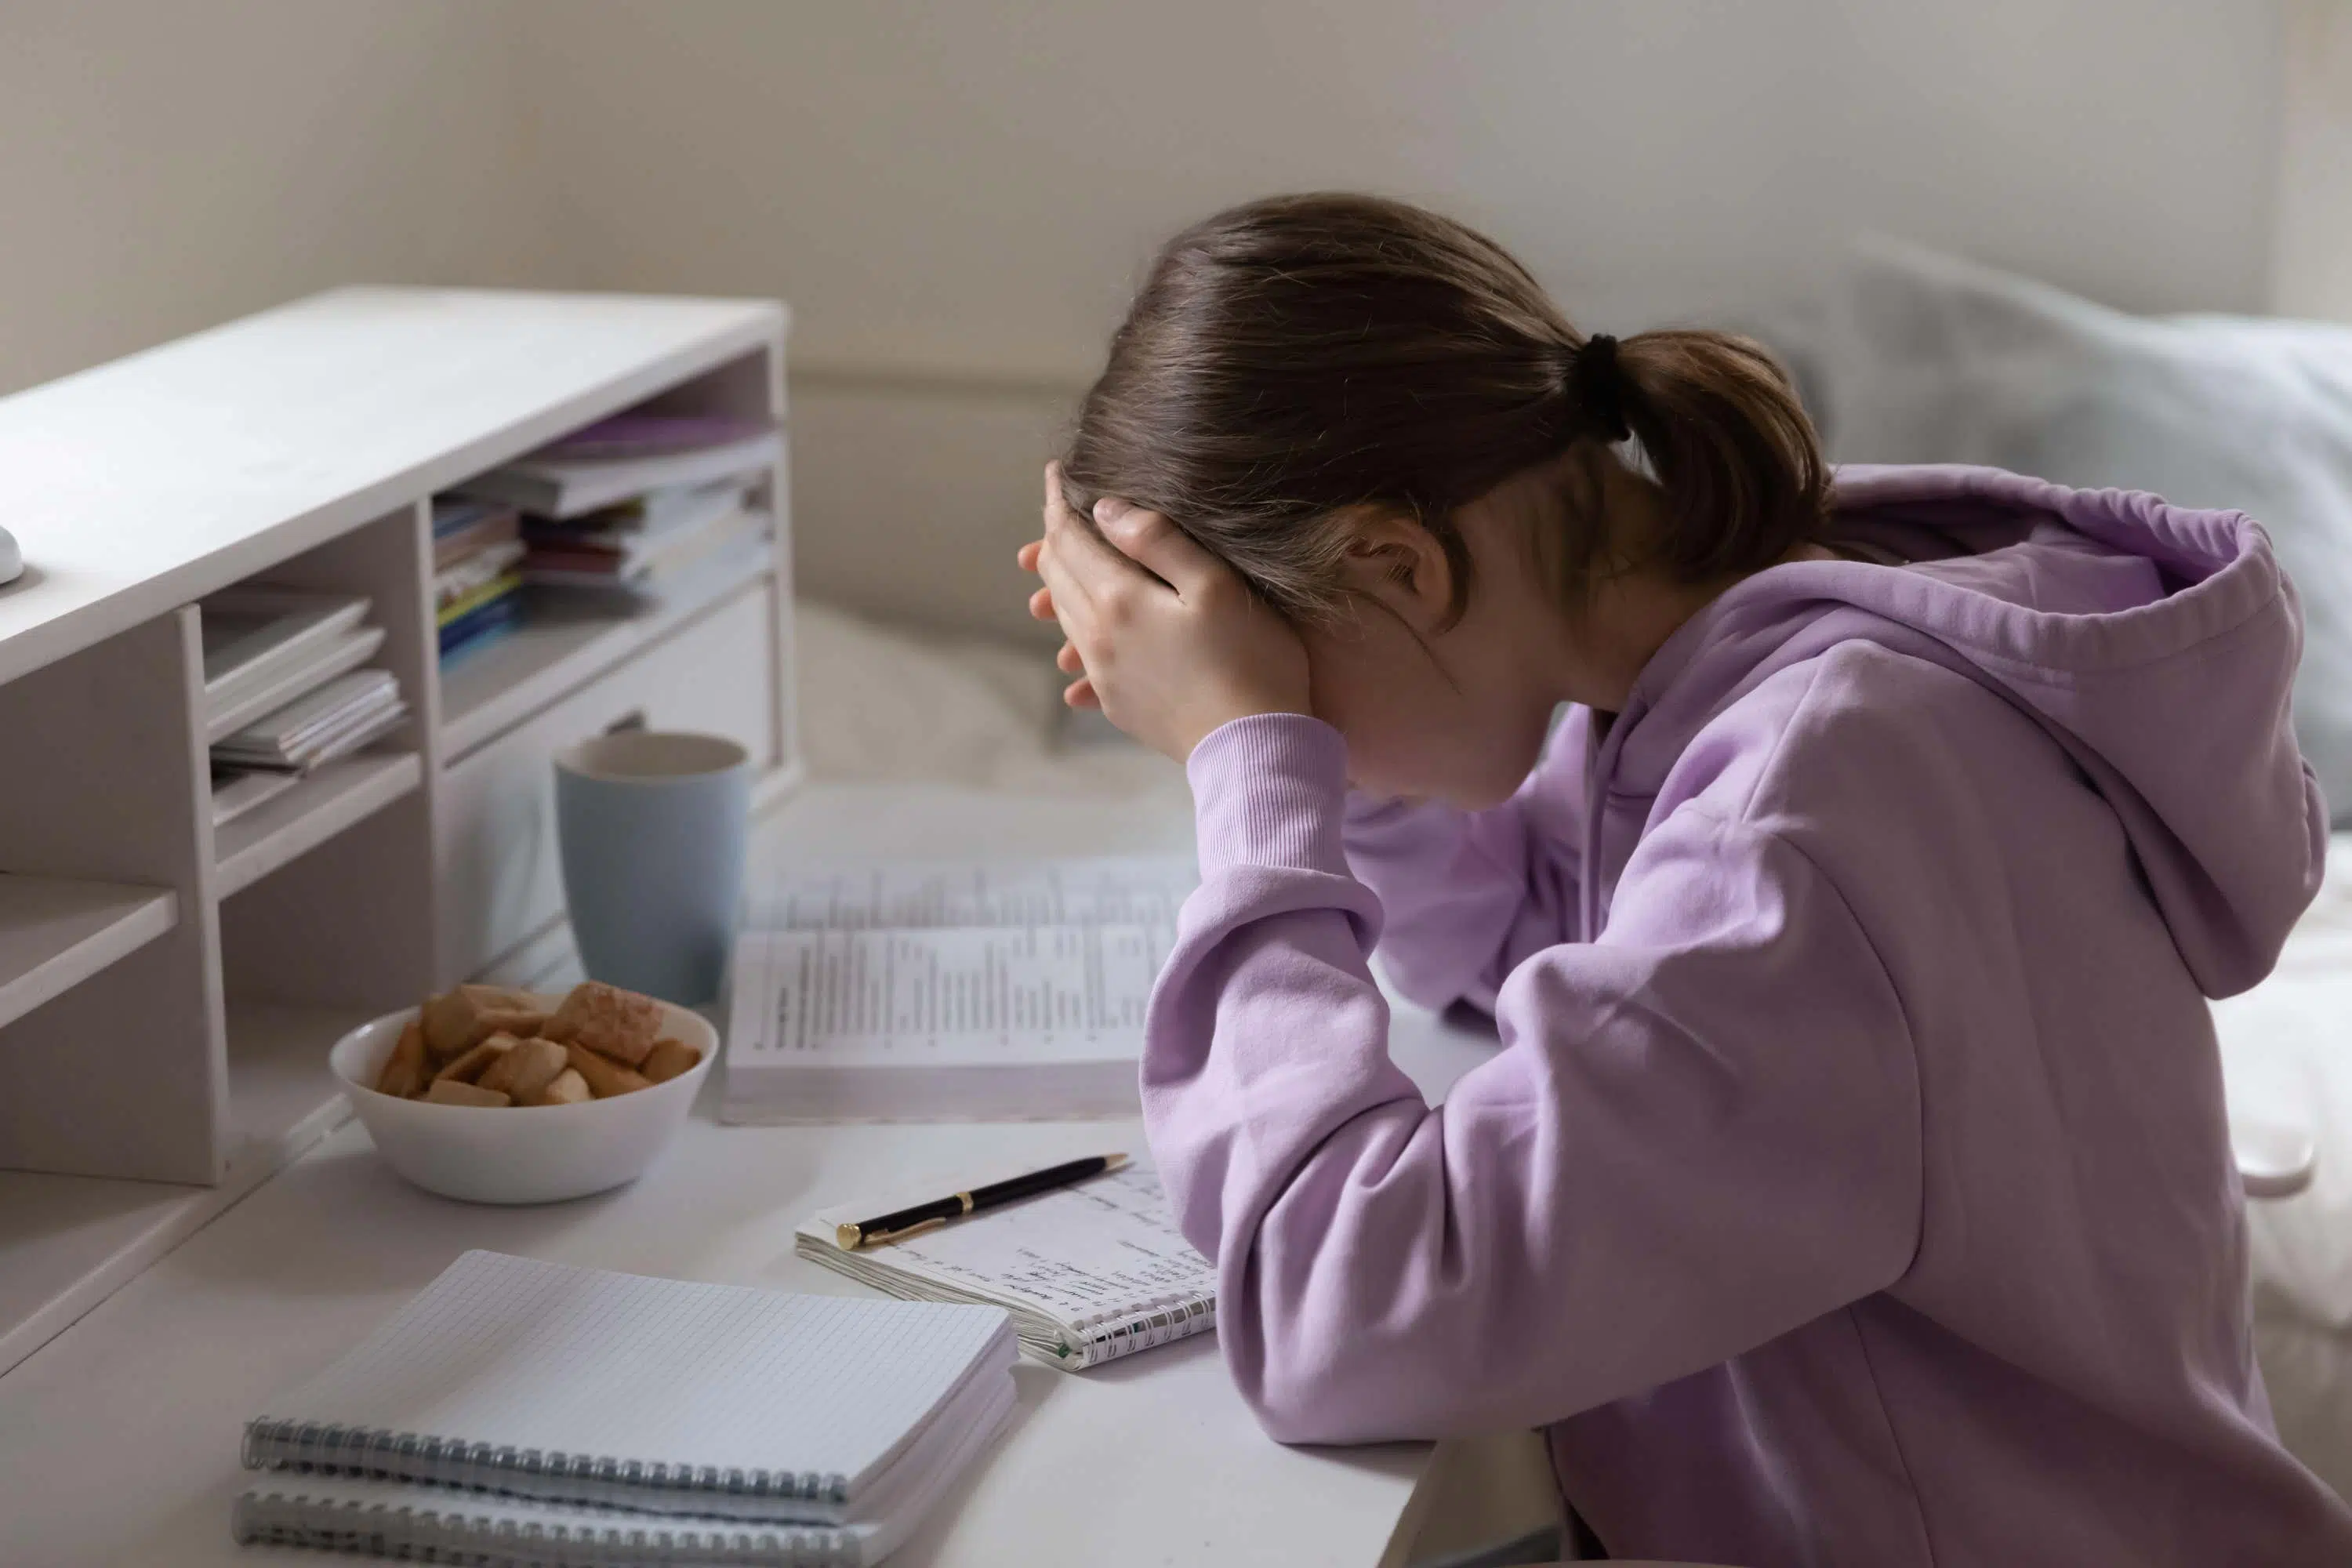 Young girl looks stressed over her desk scaled